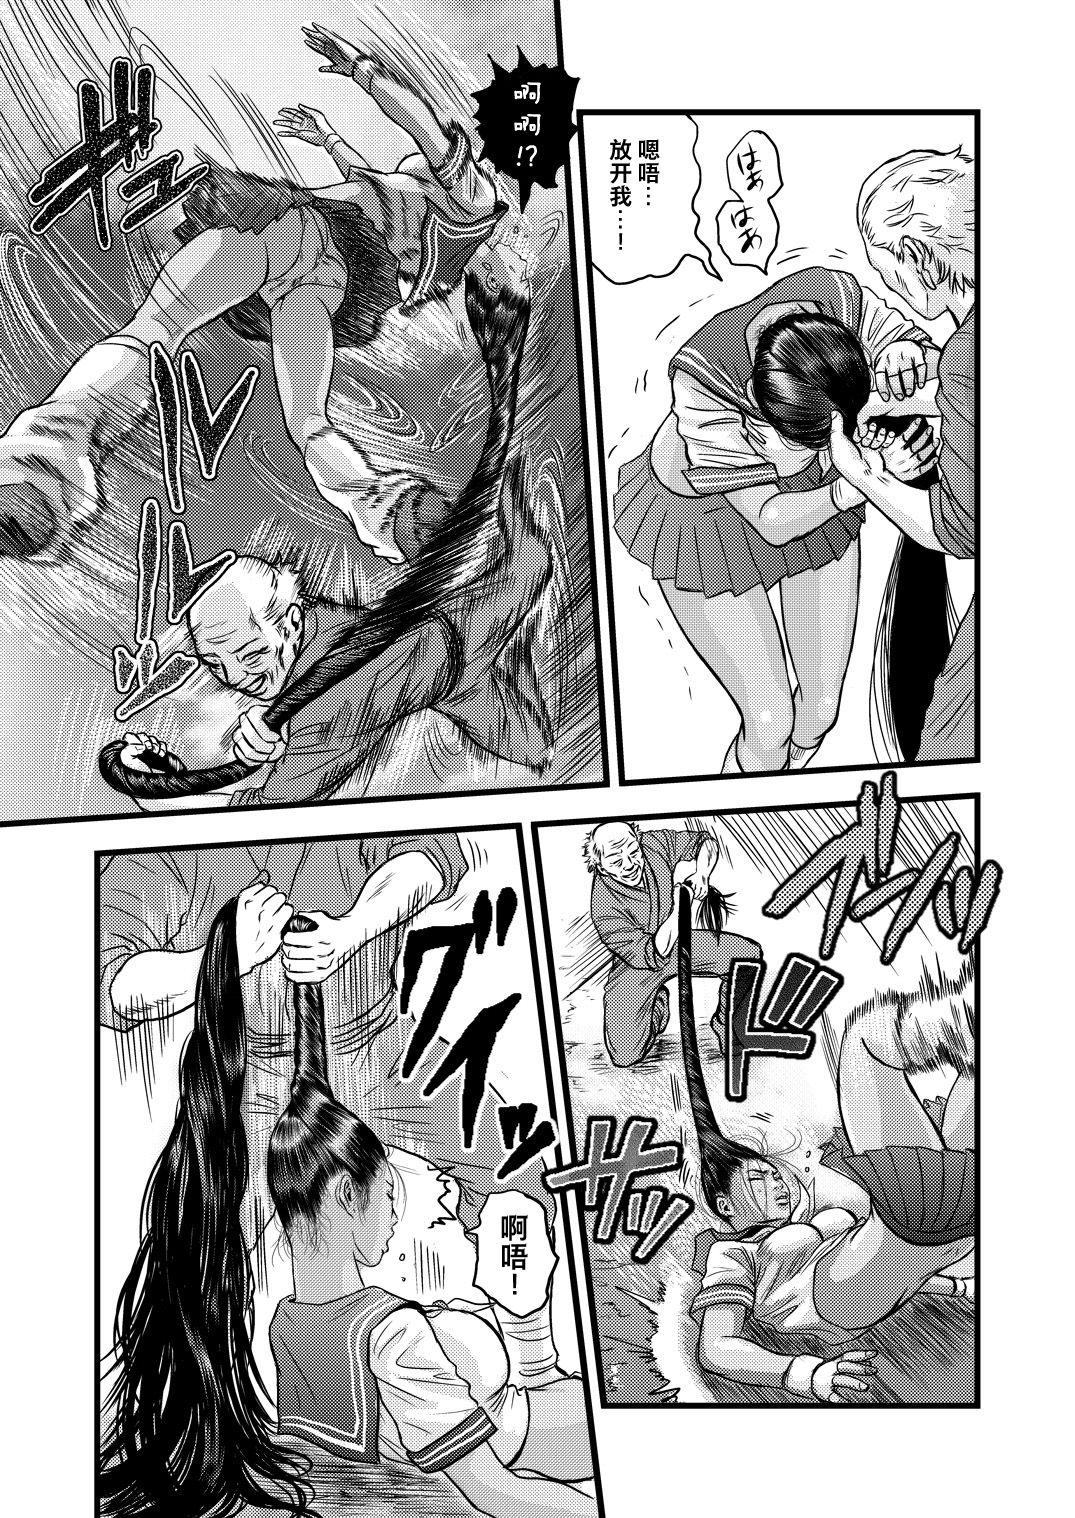 Mmf 黒髪の不覚 其の一 - Ikkitousen | battle vixens Old And Young - Page 12